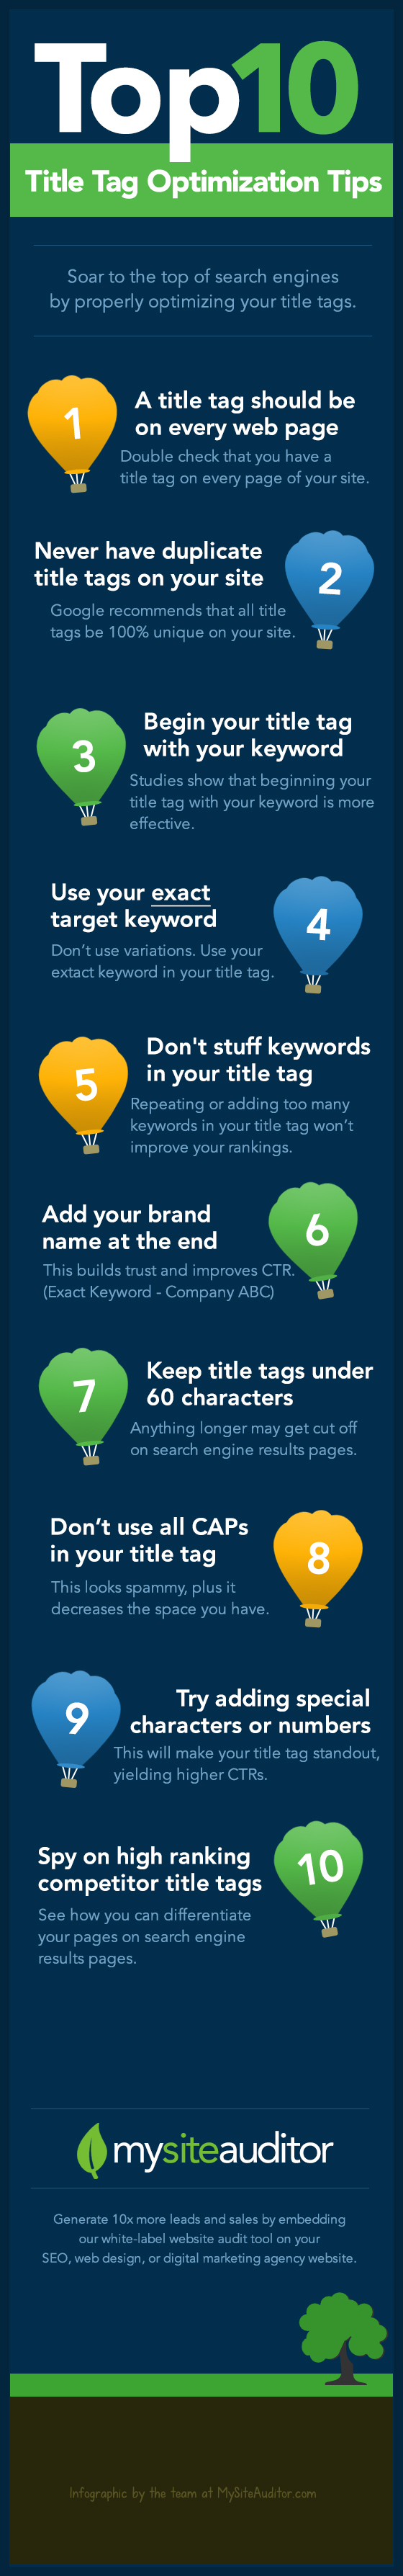 title-tag-infographic